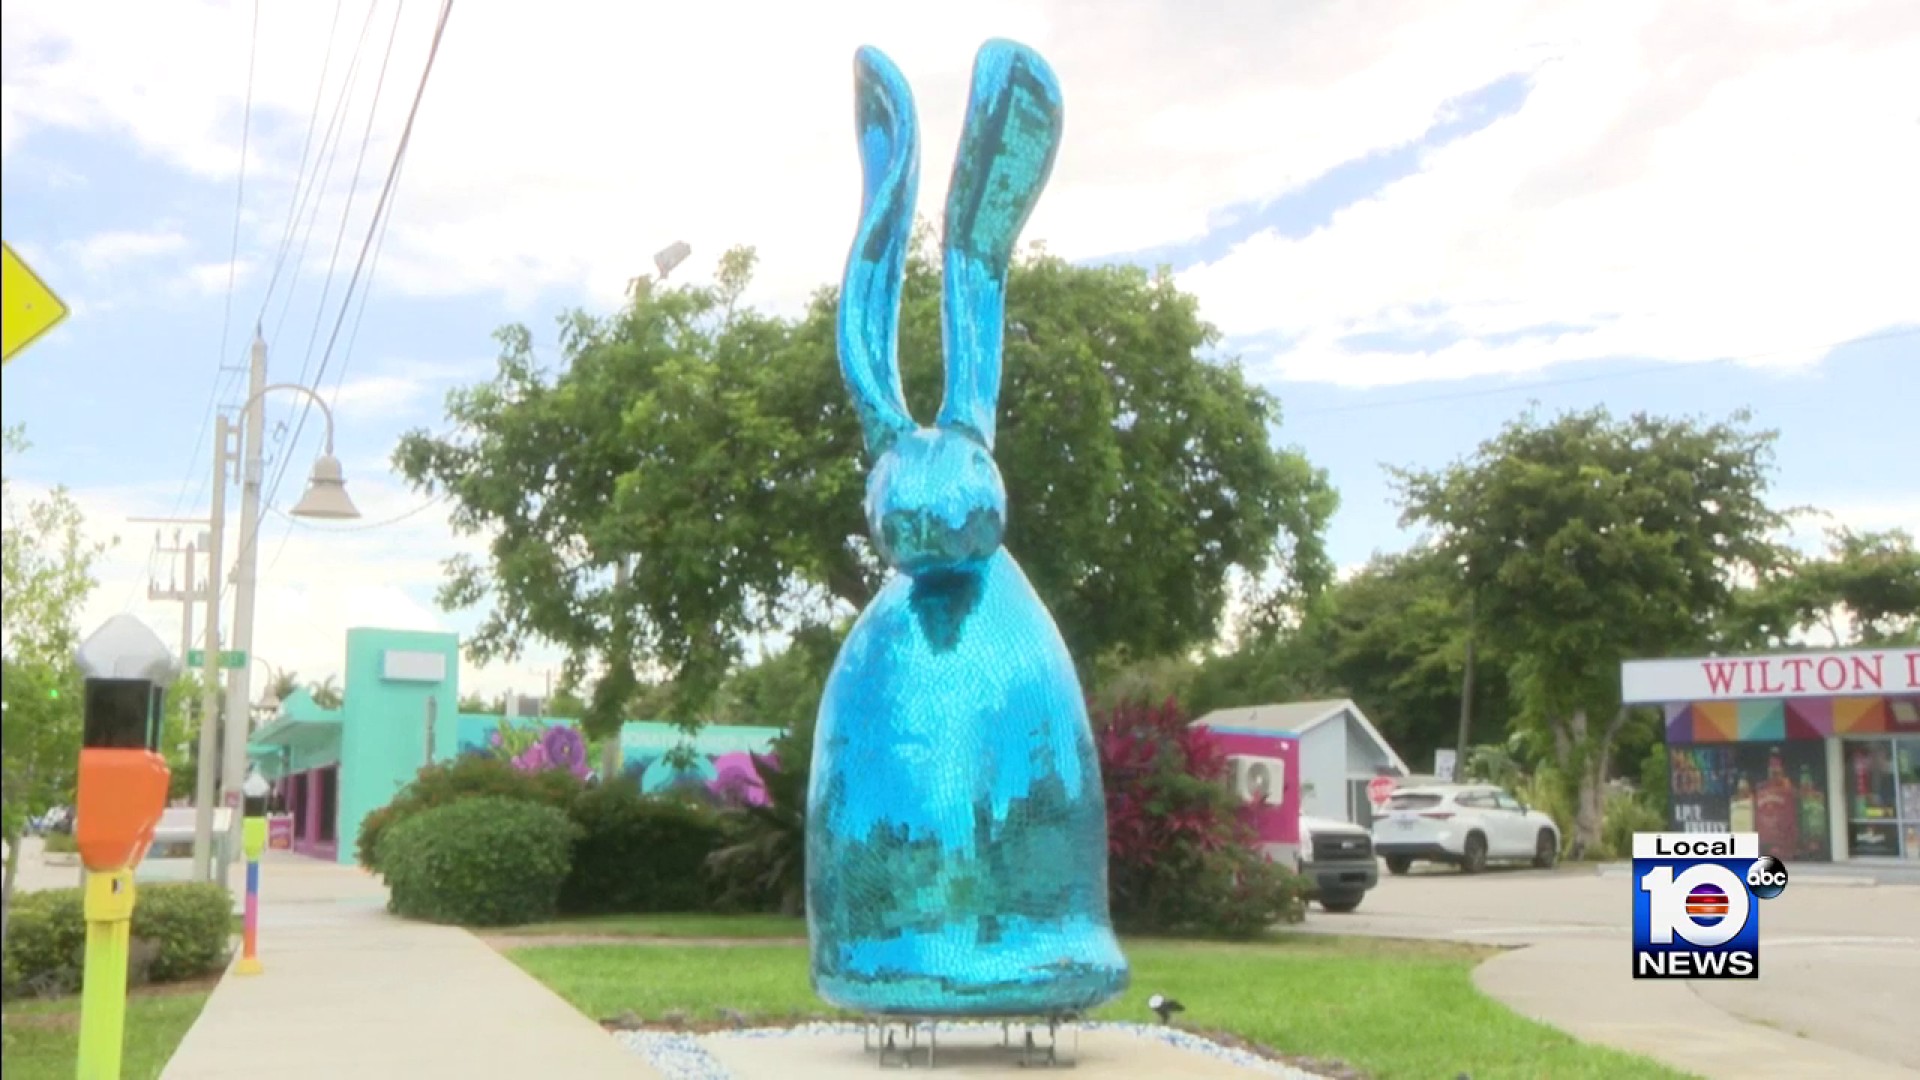 A Disgruntled Florida Man Just Plowed His Car Into a $200,000 Blue Bunny  Sculpture—His Second Time Vandalizing Public Art